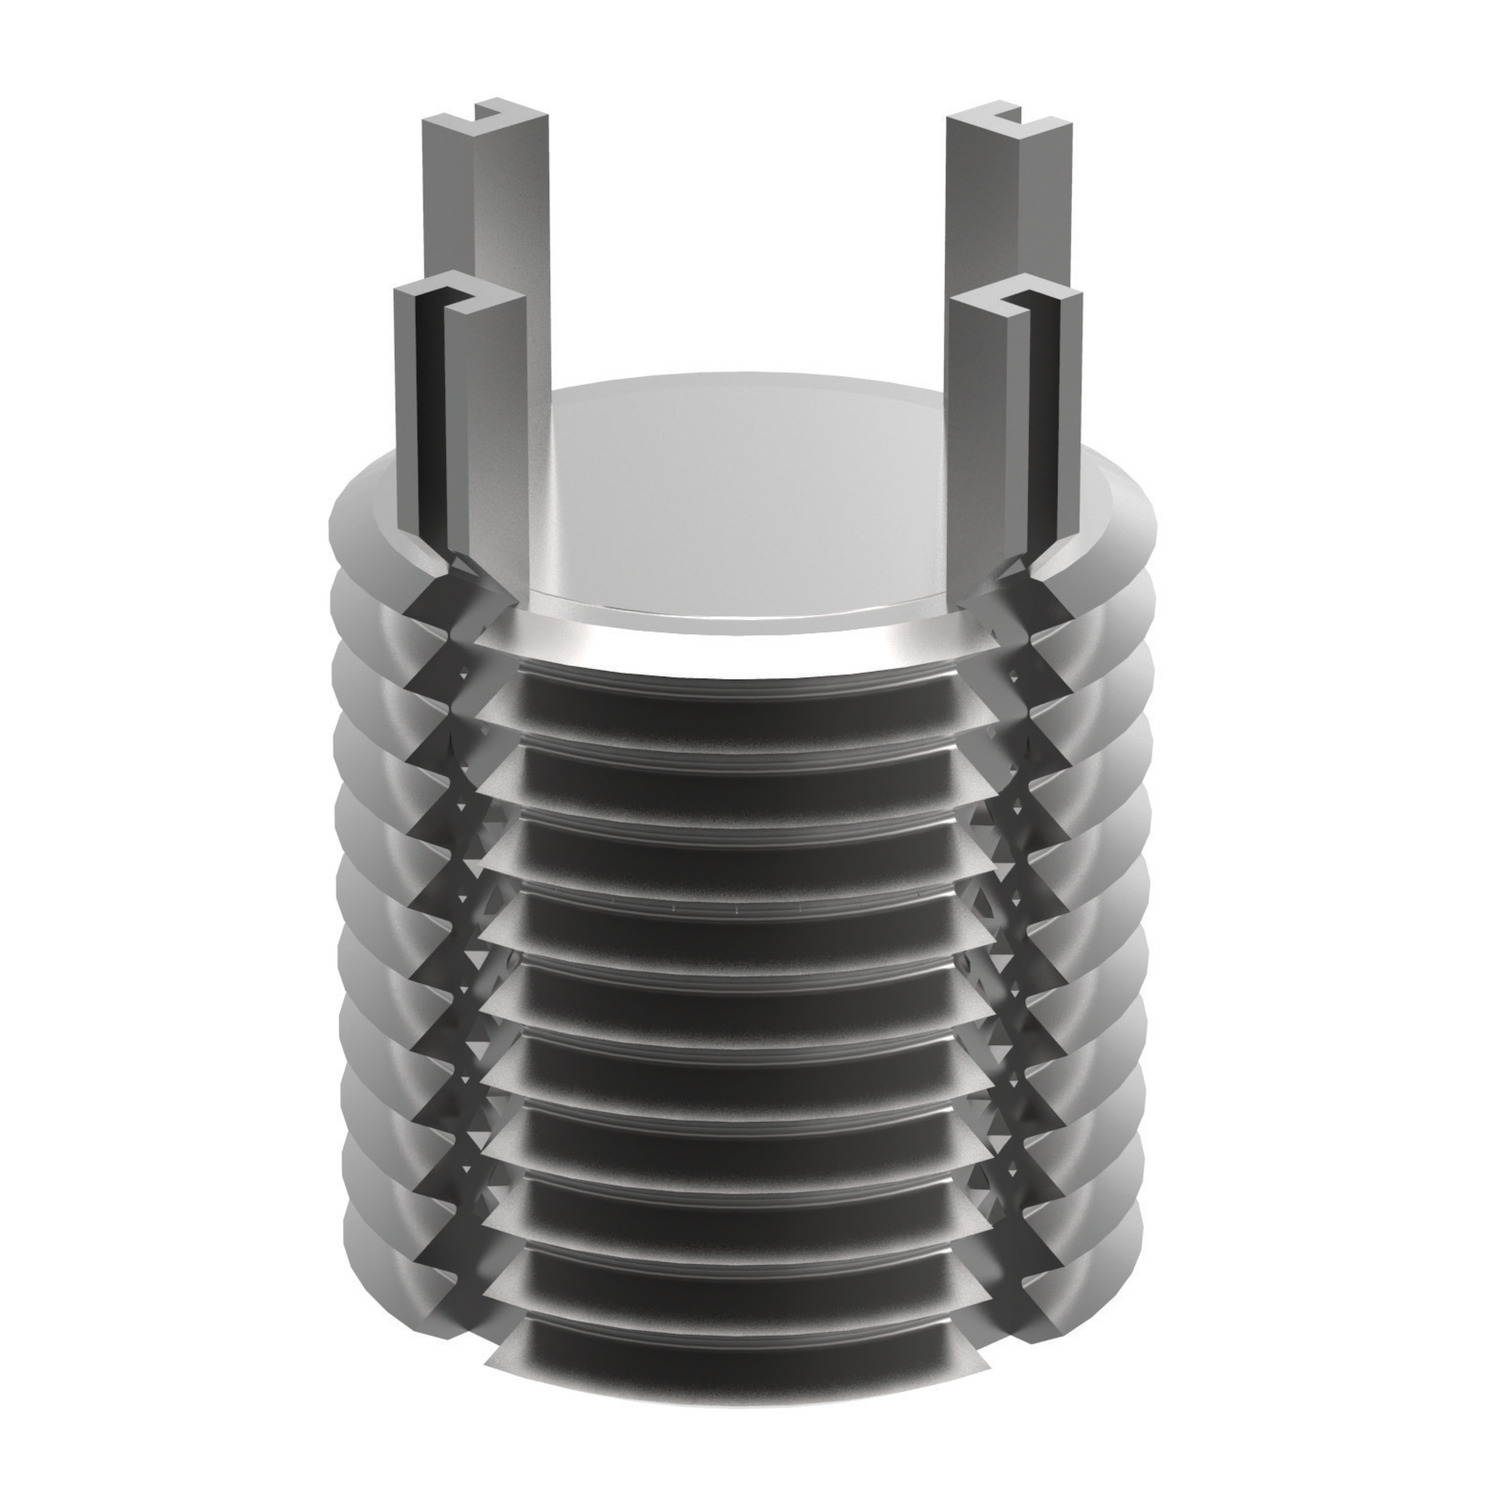 P0087.080-125-A2 Solid Threaded Insert - SS. 